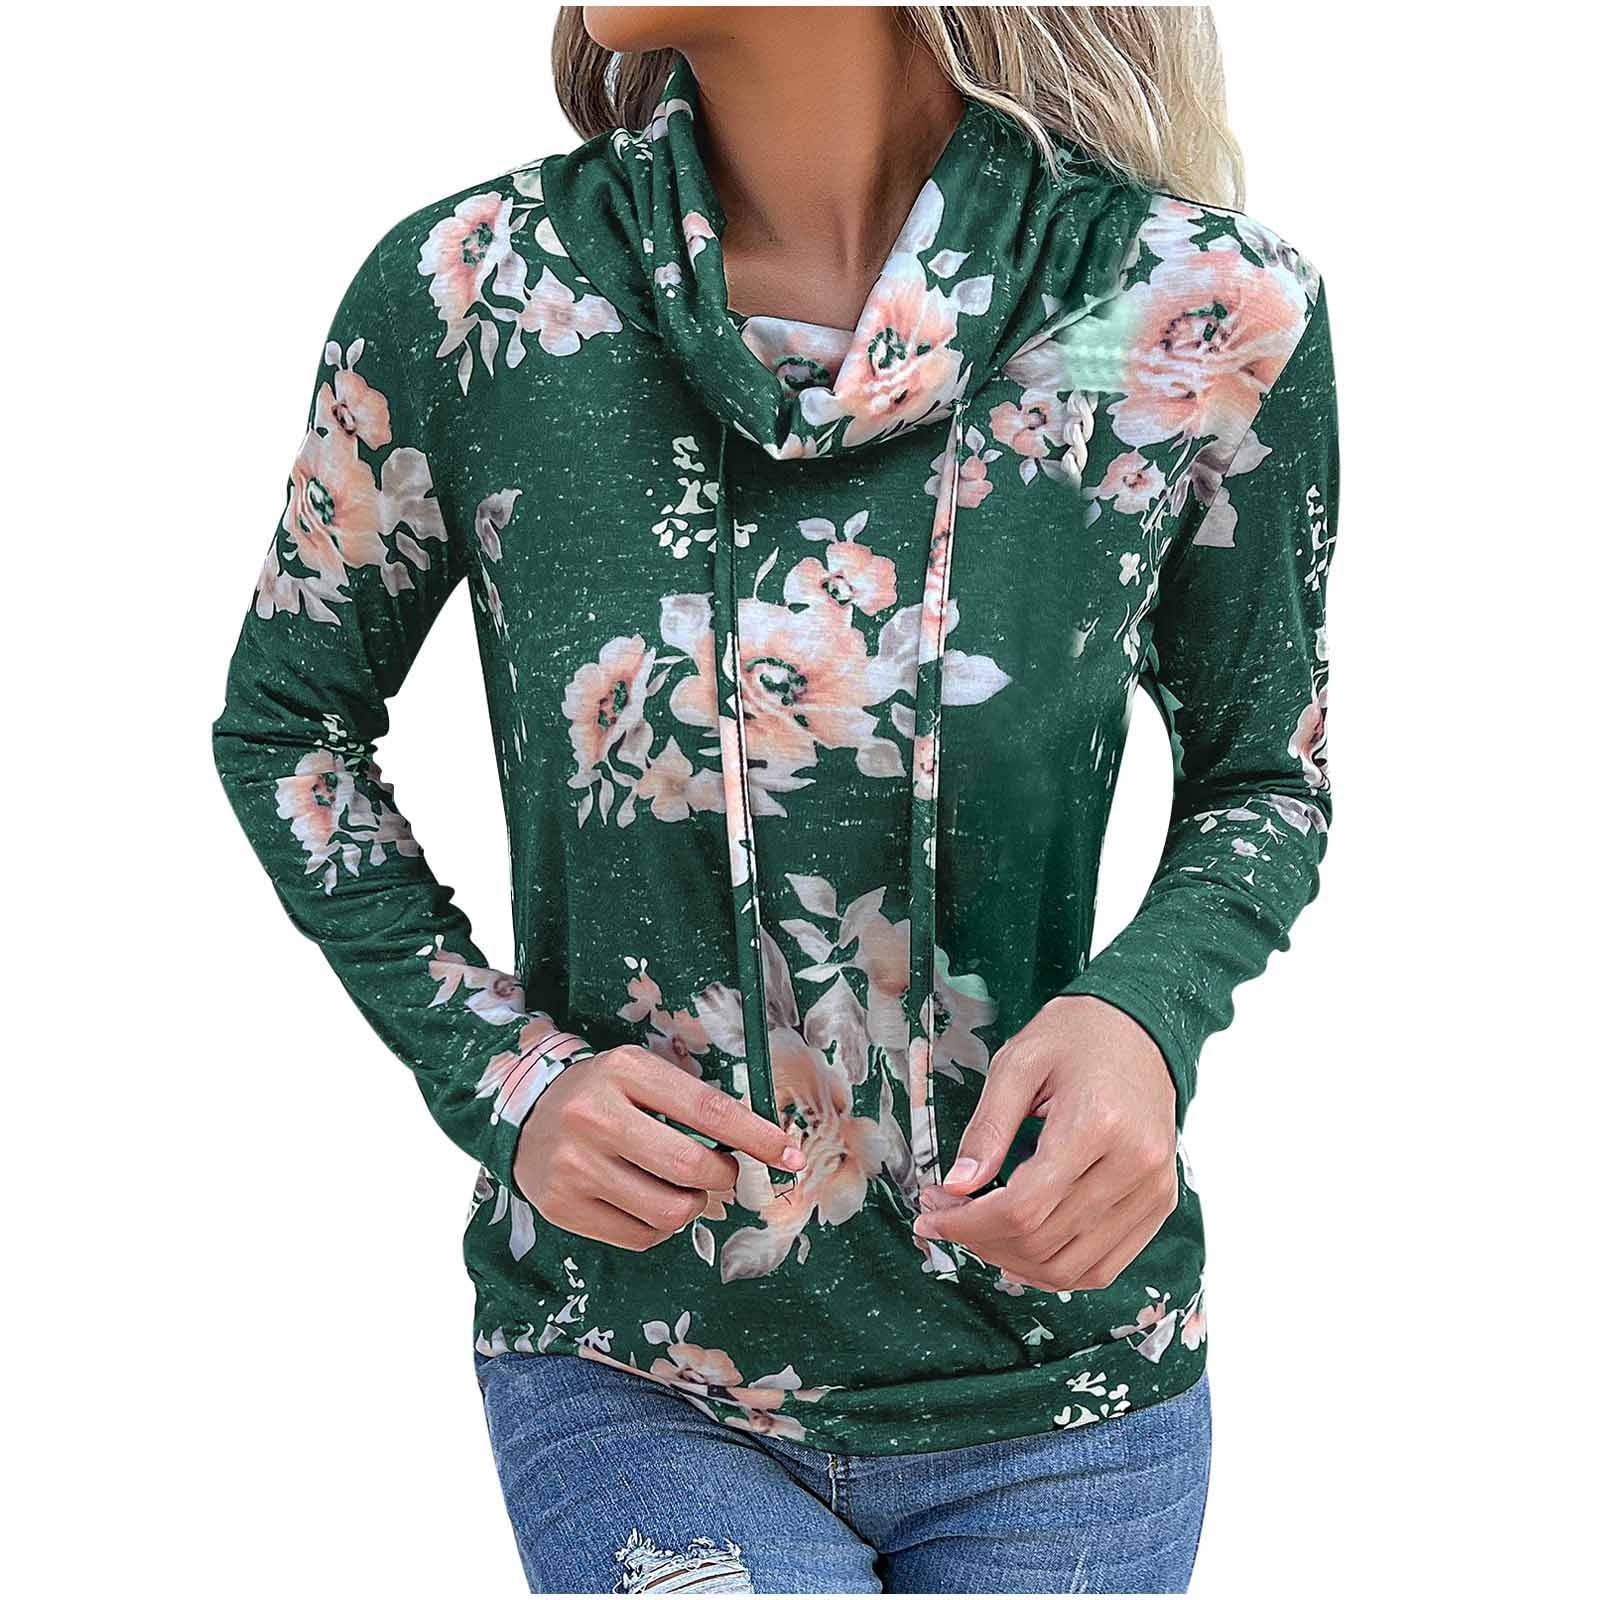 XFLWAM Womens Cowl Neck Tunic Tops Long Sleeve Floral Print Pullovers Casual  Drawstring Sweatshirts Wine Red M 